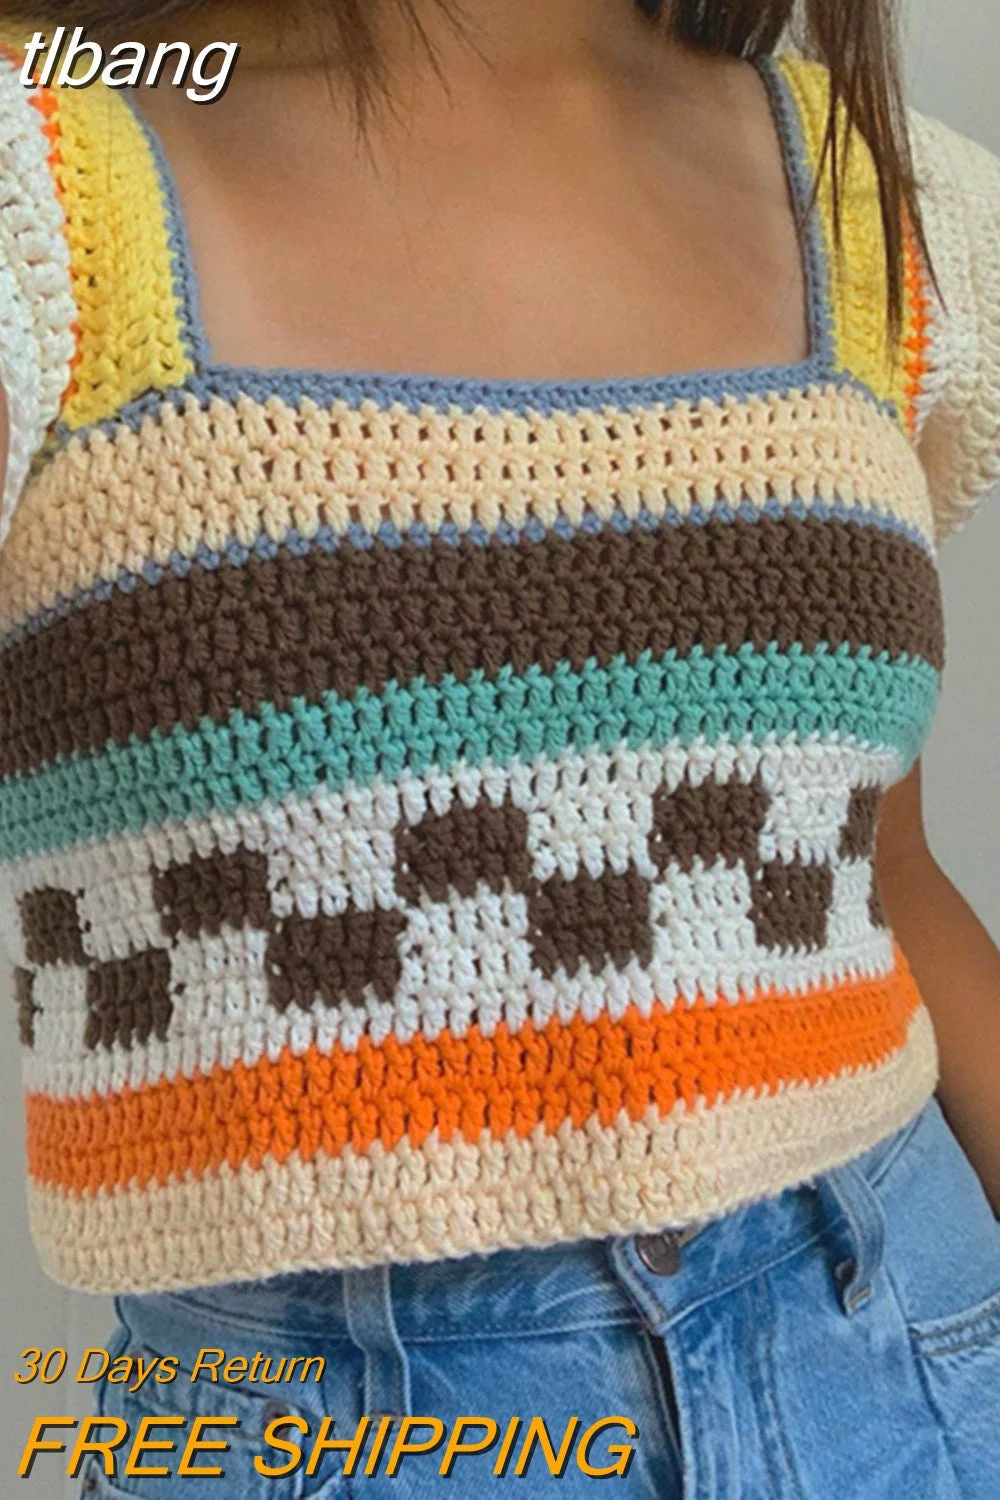 tlbang 2000s Aesthetic Knitted Top New Summer Women Square Neck Contrast Color Crochet Tanks y2k Fairy Core Clothes Streetwear